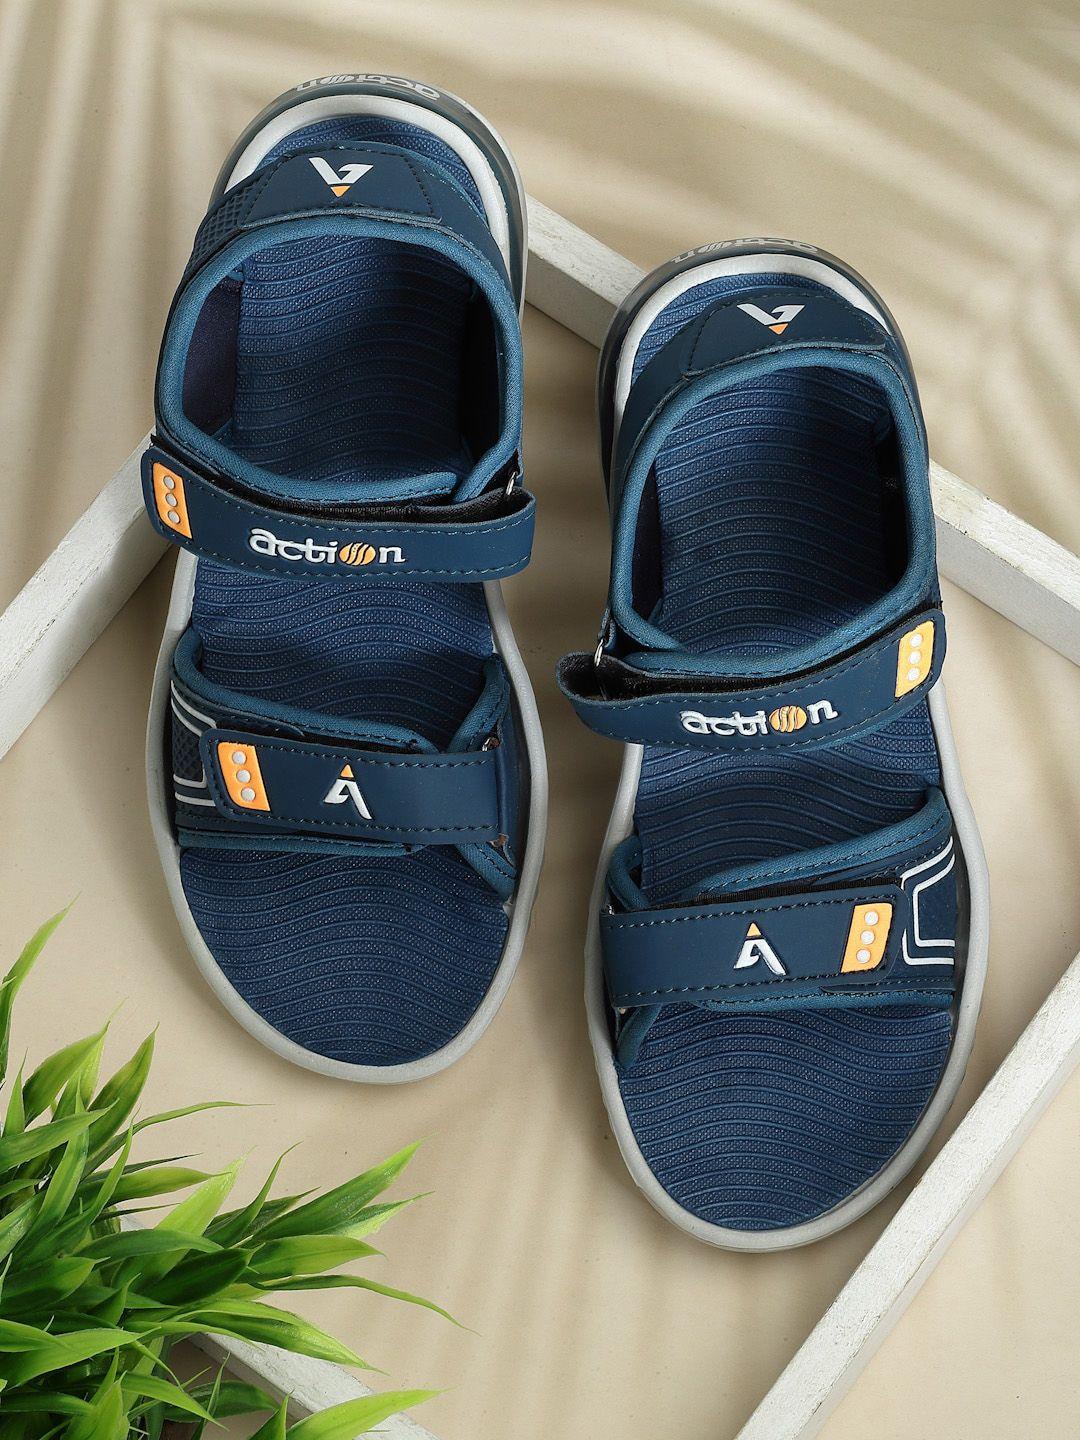 action-men-lightweight-sports-sandals-with-velcro